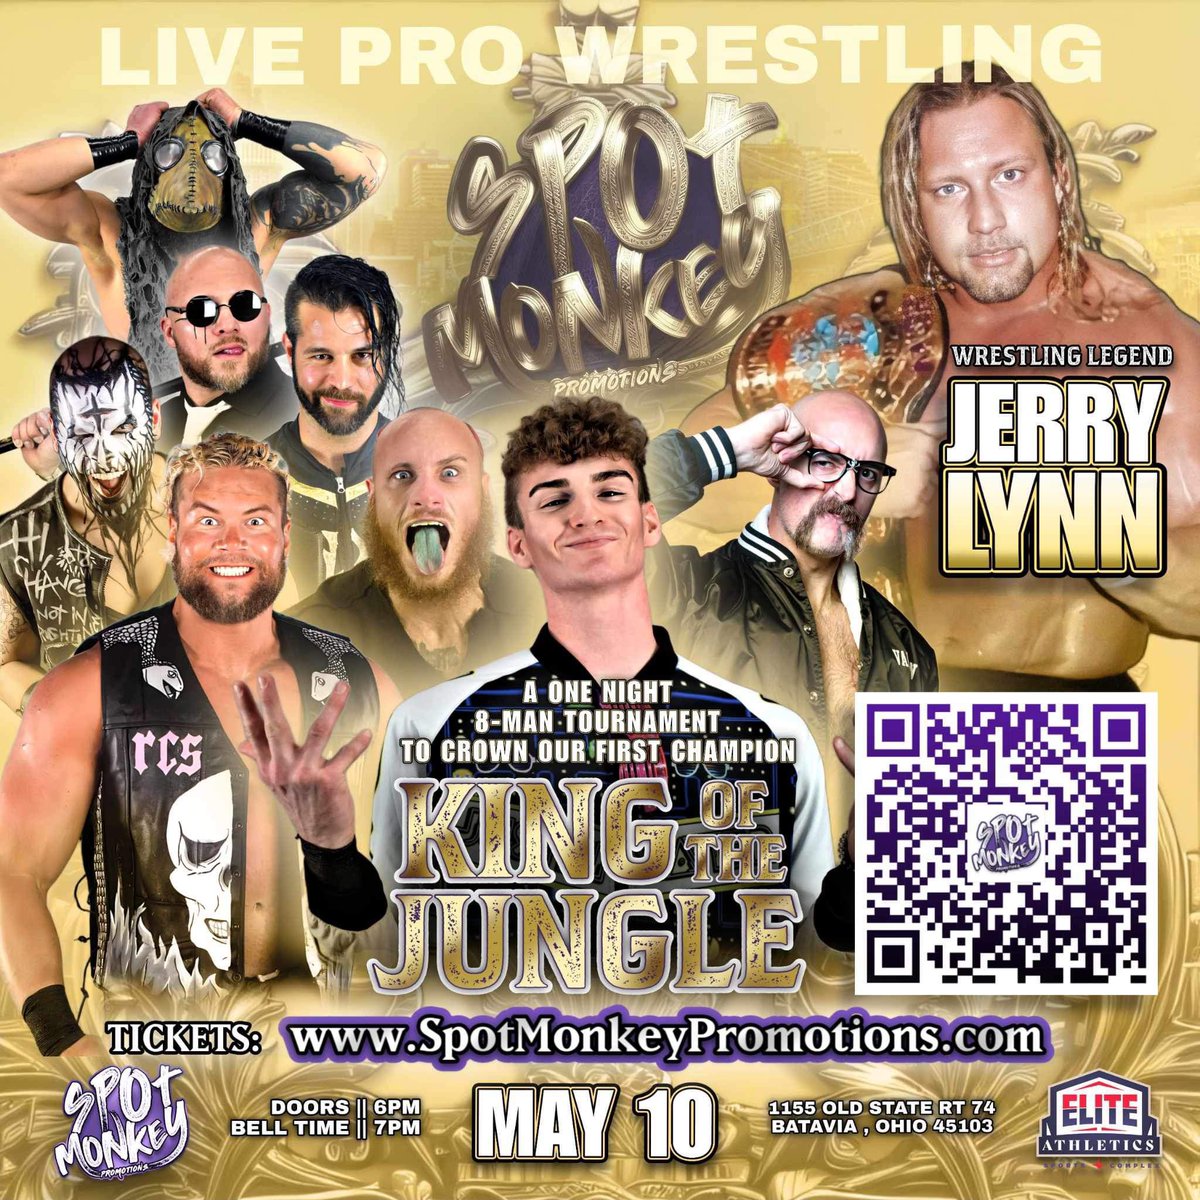 We are two weeks away from our event in Batavia, Ohio! It features an appearance by former World Champion Jerry Lynn and an 8 man tournament to determine our first champion! Snag your tickets today!